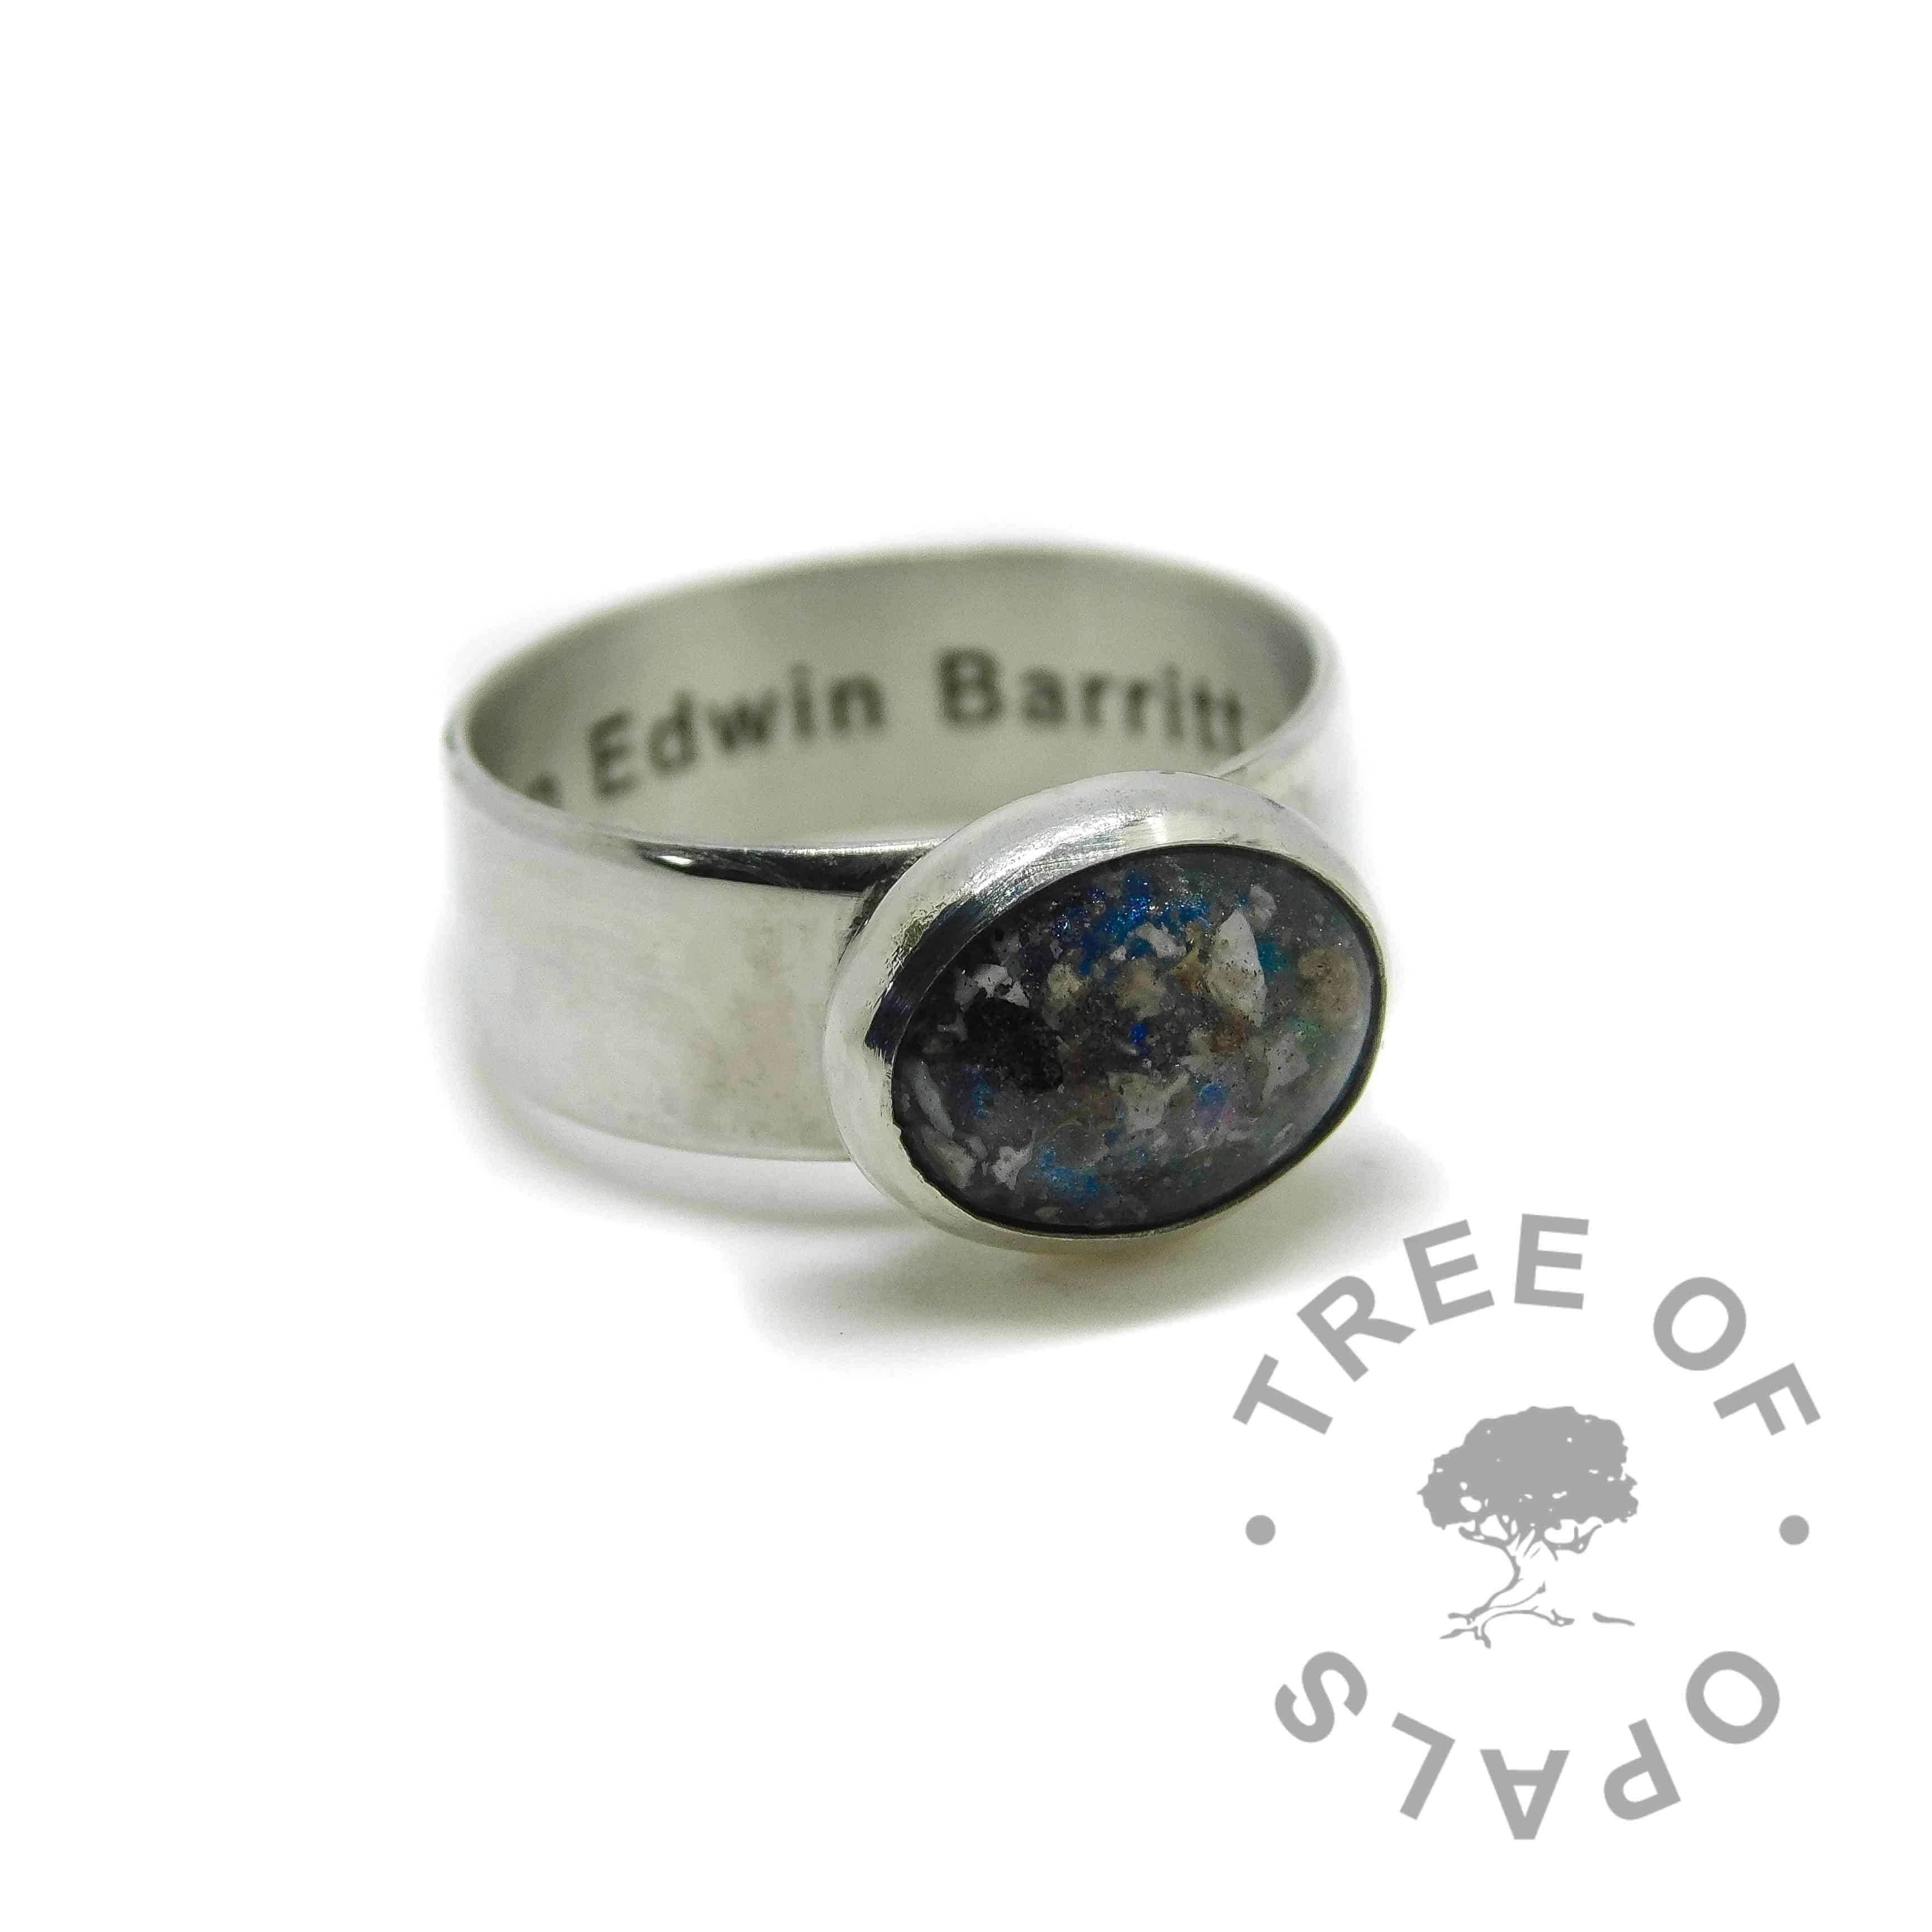 6mm wide band cremation ash ring with engraving, ash with Aegean blue sparkle mix